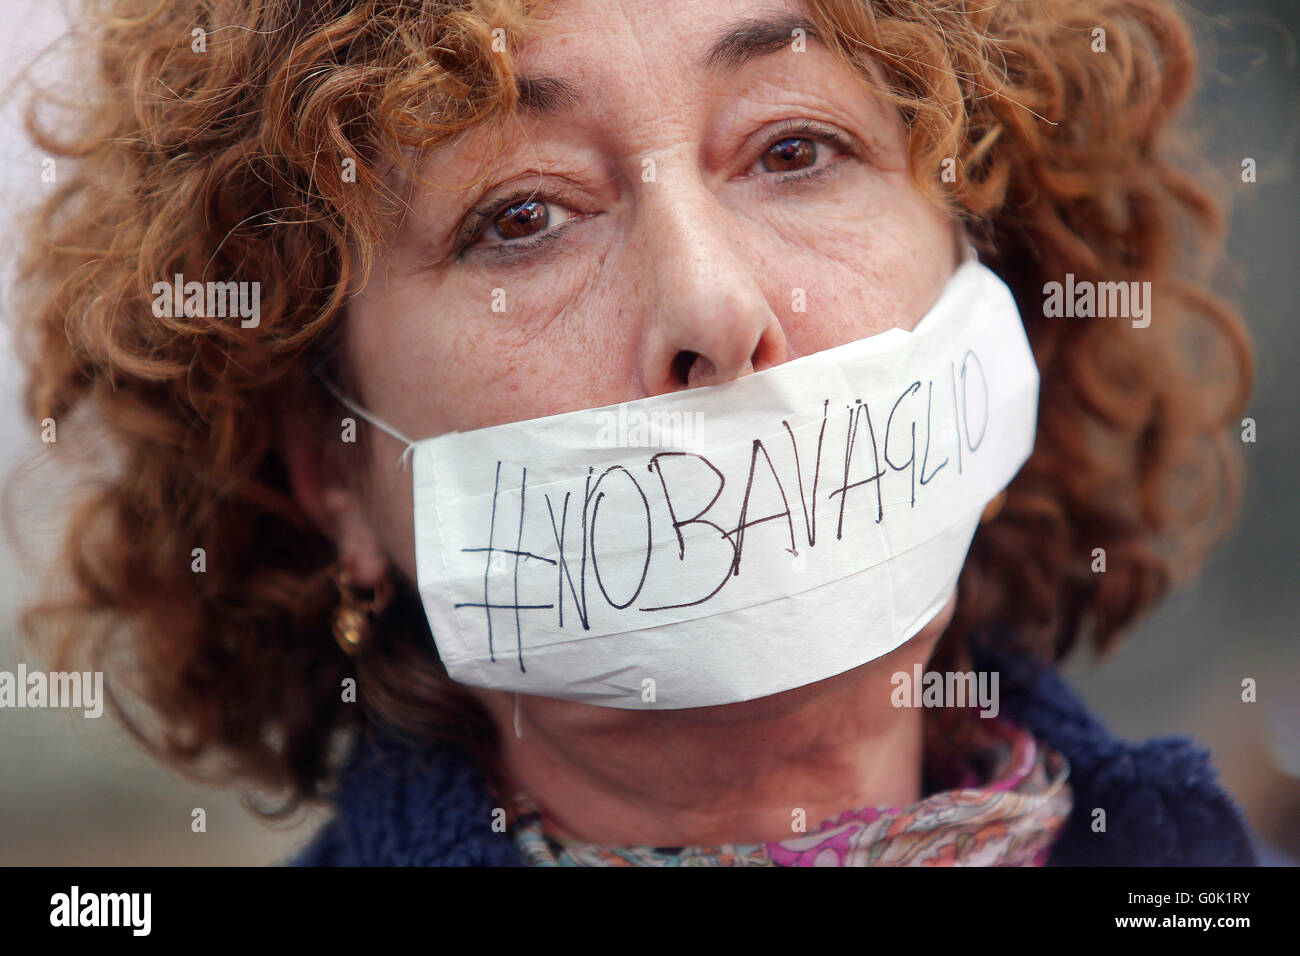 Rome, Italy. 2nd May, 2016. Journalists gagged Rome 02nd May 2016. Marathon of sit-ins in front of the Iranian, Egyptian and Turkish embassies for freedom of the press and for human rights. Photo Samantha Zucchi/ Insidefoto/Alamy Live News Stock Photo